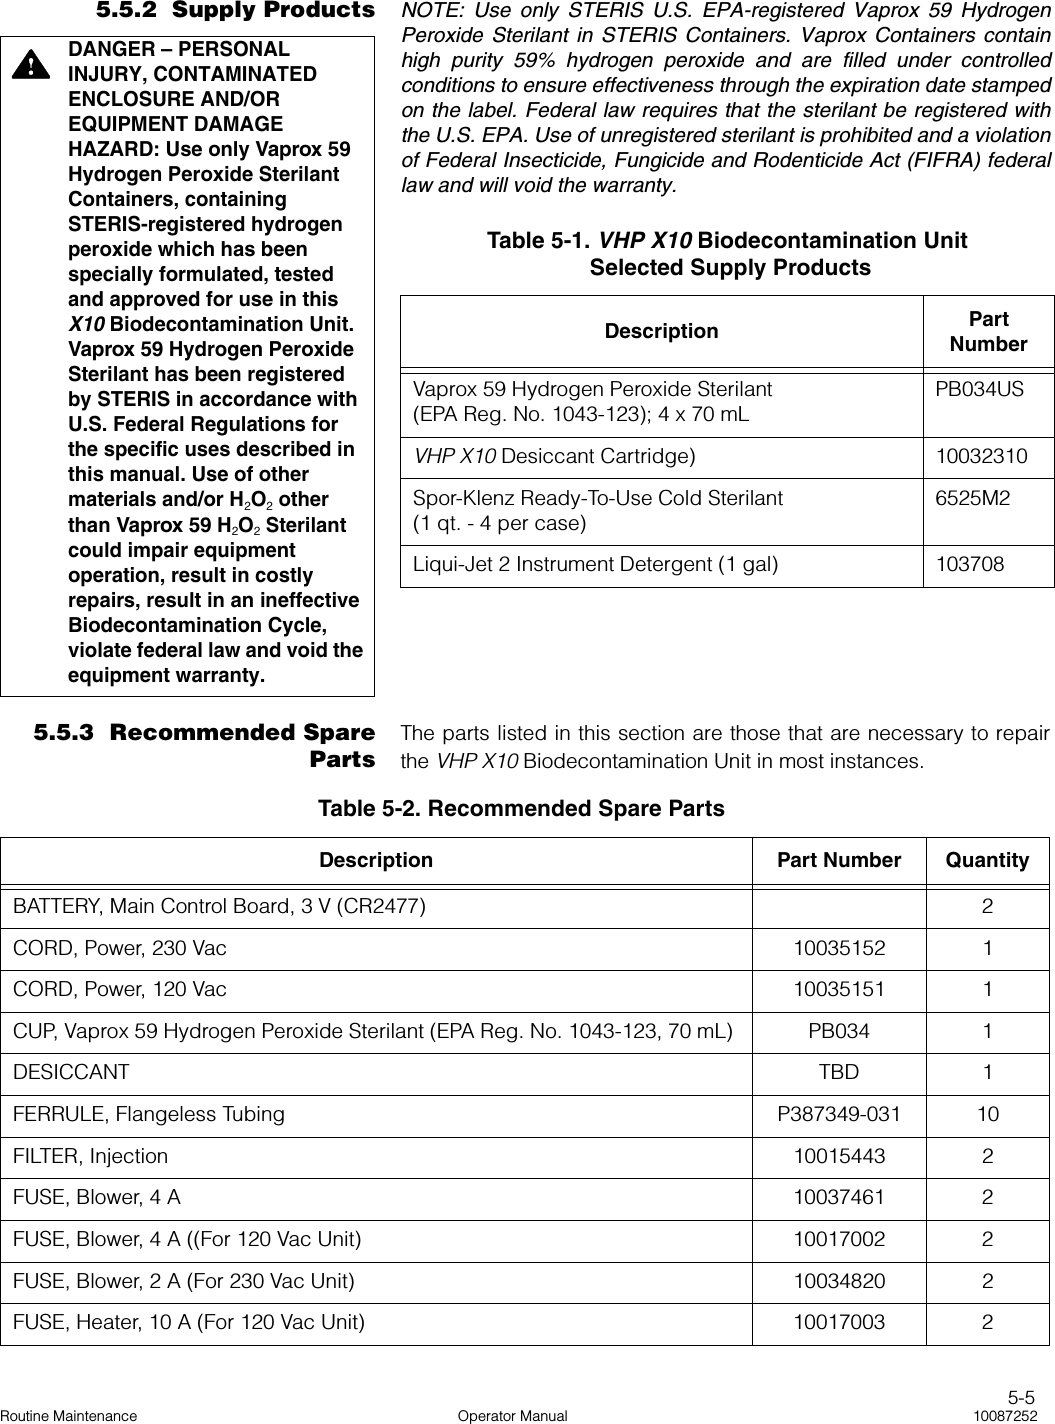 5-5Routine Maintenance Operator Manual 100872525.5.2  Supply Products NOTE: Use only STERIS U.S. EPA-registered Vaprox 59 HydrogenPeroxide Sterilant in STERIS Containers. Vaprox Containers containhigh purity 59% hydrogen peroxide and are filled under controlledconditions to ensure effectiveness through the expiration date stampedon the label. Federal law requires that the sterilant be registered withthe U.S. EPA. Use of unregistered sterilant is prohibited and a violationof Federal Insecticide, Fungicide and Rodenticide Act (FIFRA) federallaw and will void the warranty. 5.5.3  Recommended SparePartsThe parts listed in this section are those that are necessary to repairthe VHP X10 Biodecontamination Unit in most instances.DANGER – PERSONAL INJURY, CONTAMINATED ENCLOSURE AND/OR EQUIPMENT DAMAGE HAZARD: Use only Vaprox 59 Hydrogen Peroxide Sterilant Containers, containing STERIS-registered hydrogen peroxide which has been specially formulated, tested and approved for use in this X10 Biodecontamination Unit. Vaprox 59 Hydrogen Peroxide Sterilant has been registered by STERIS in accordance with U.S. Federal Regulations for the specific uses described in this manual. Use of other materials and/or H2O2 other than Vaprox 59 H2O2 Sterilant could impair equipment operation, result in costly repairs, result in an ineffective Biodecontamination Cycle, violate federal law and void the equipment warranty.Table 5-1. VHP X10 Biodecontamination Unit Selected Supply ProductsDescription Part NumberVaprox 59 Hydrogen Peroxide Sterilant(EPA Reg. No. 1043-123); 4 x 70 mLPB034USVHP X10 Desiccant Cartridge) 10032310Spor-Klenz Ready-To-Use Cold Sterilant (1 qt. - 4 per case)6525M2Liqui-Jet 2 Instrument Detergent (1 gal) 103708Table 5-2. Recommended Spare PartsDescription Part Number QuantityBATTERY, Main Control Board, 3 V (CR2477)  2CORD, Power, 230 Vac 10035152 1CORD, Power, 120 Vac 10035151 1CUP, Vaprox 59 Hydrogen Peroxide Sterilant (EPA Reg. No. 1043-123, 70 mL) PB034 1DESICCANT  TBD 1FERRULE, Flangeless Tubing  P387349-031 10FILTER, Injection 10015443 2FUSE, Blower, 4 A 10037461 2FUSE, Blower, 4 A ((For 120 Vac Unit) 10017002 2FUSE, Blower, 2 A (For 230 Vac Unit) 10034820 2FUSE, Heater, 10 A (For 120 Vac Unit) 10017003 2